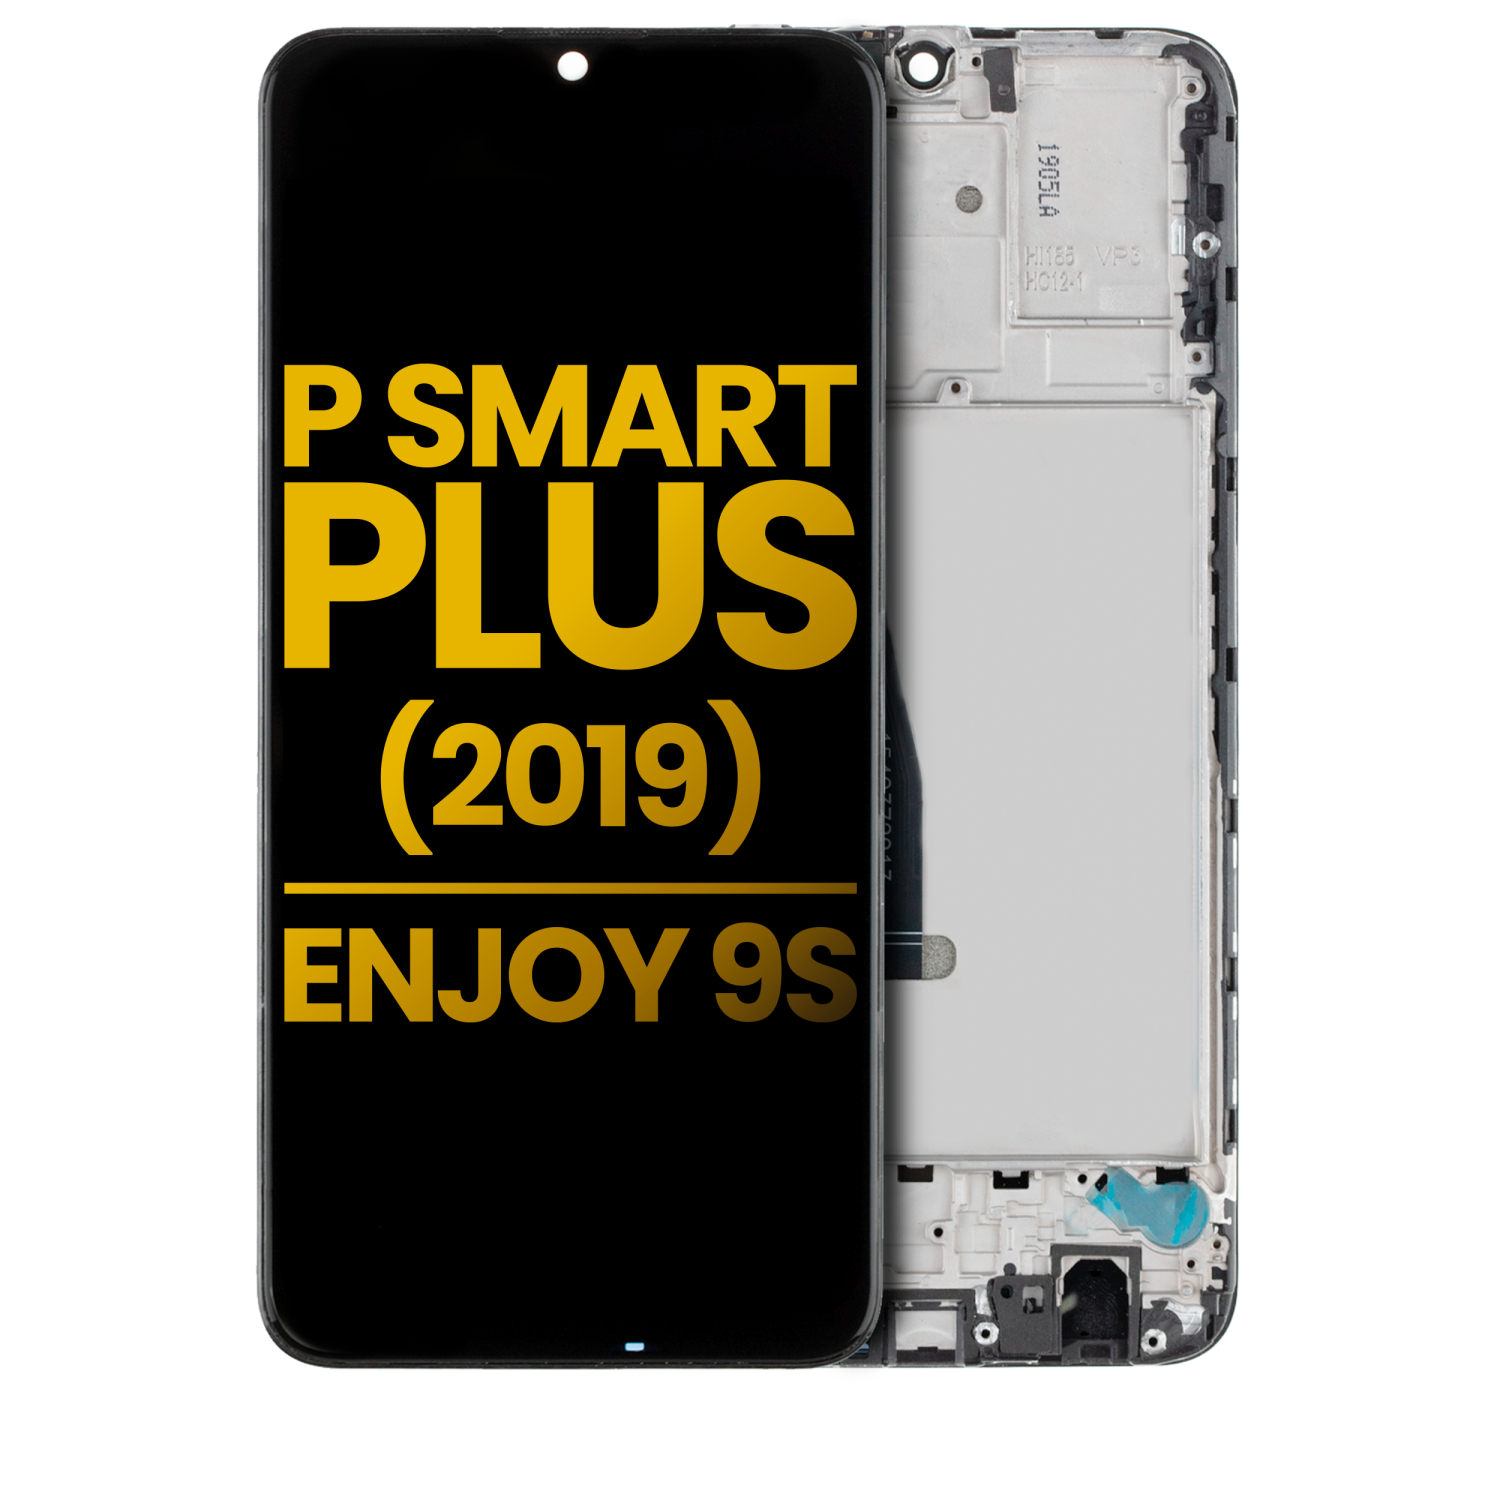 Replacement LCD Assembly With Frame Compatible For Huawei P Smart Plus (2019) / Enjoy 9S (Refurbished) (Black)